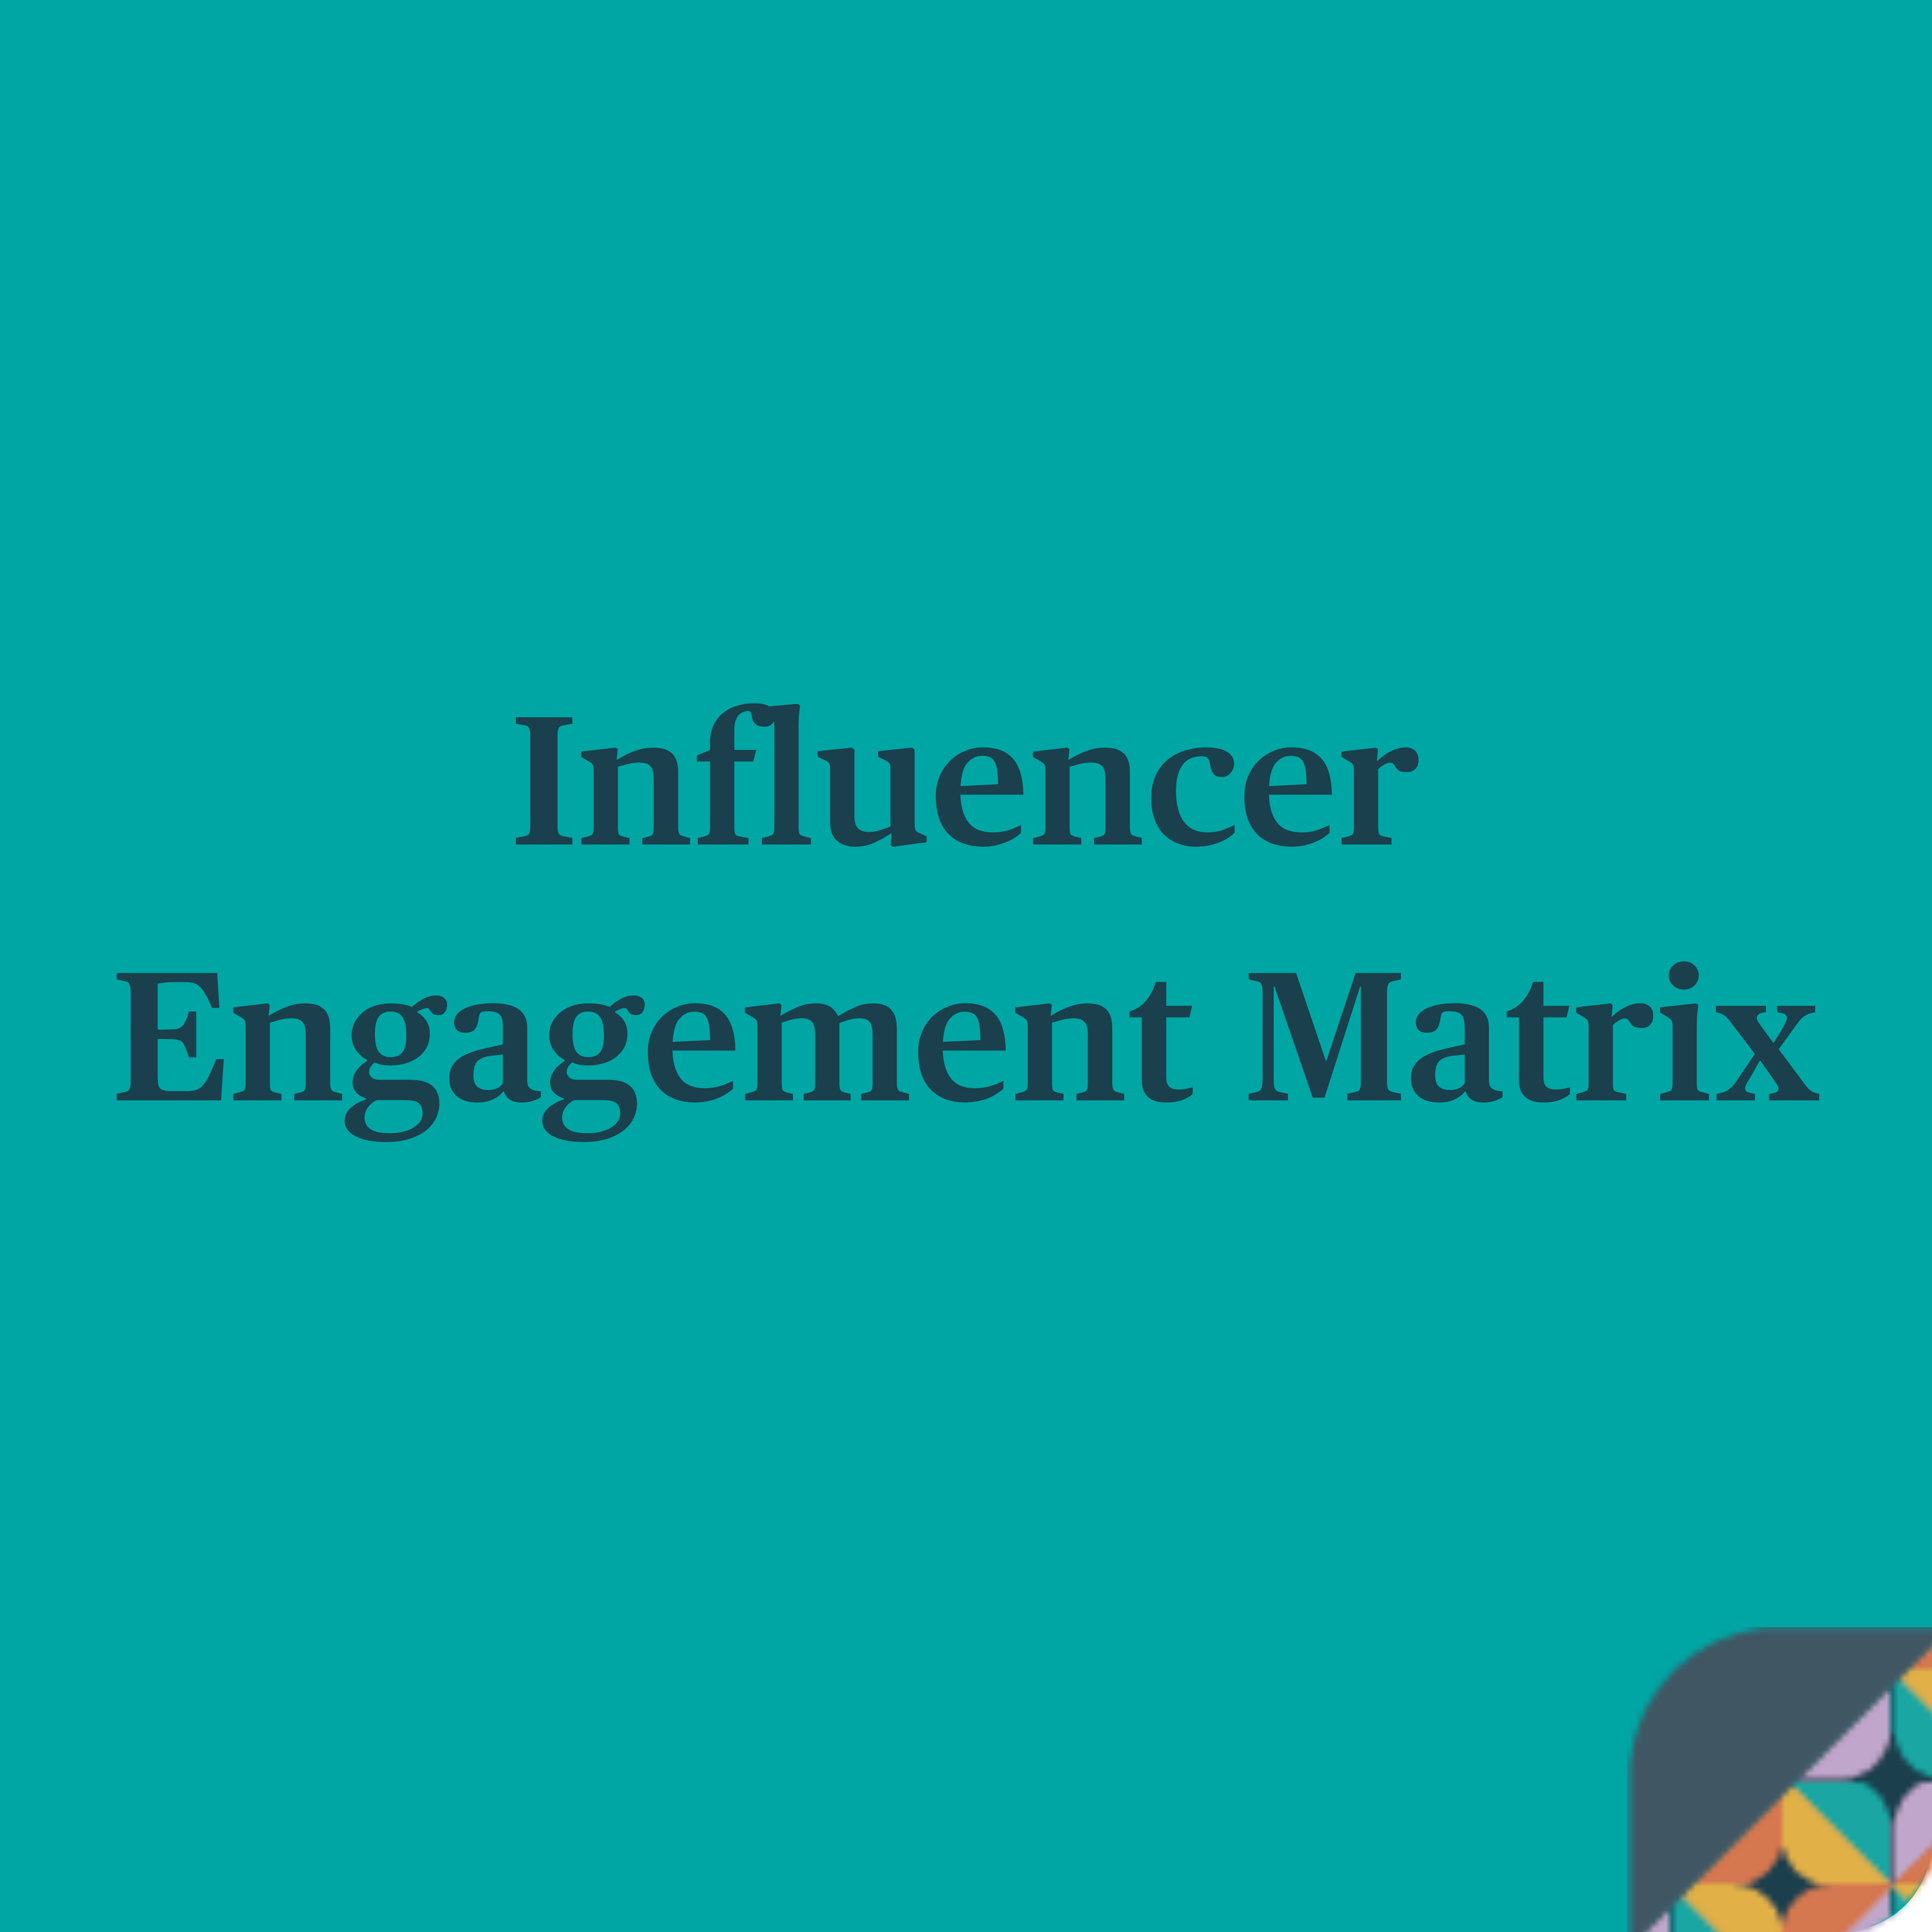 Teal tile with a multicoloured pattern corner. Text in blue says: Influencer Engagement Matrix.